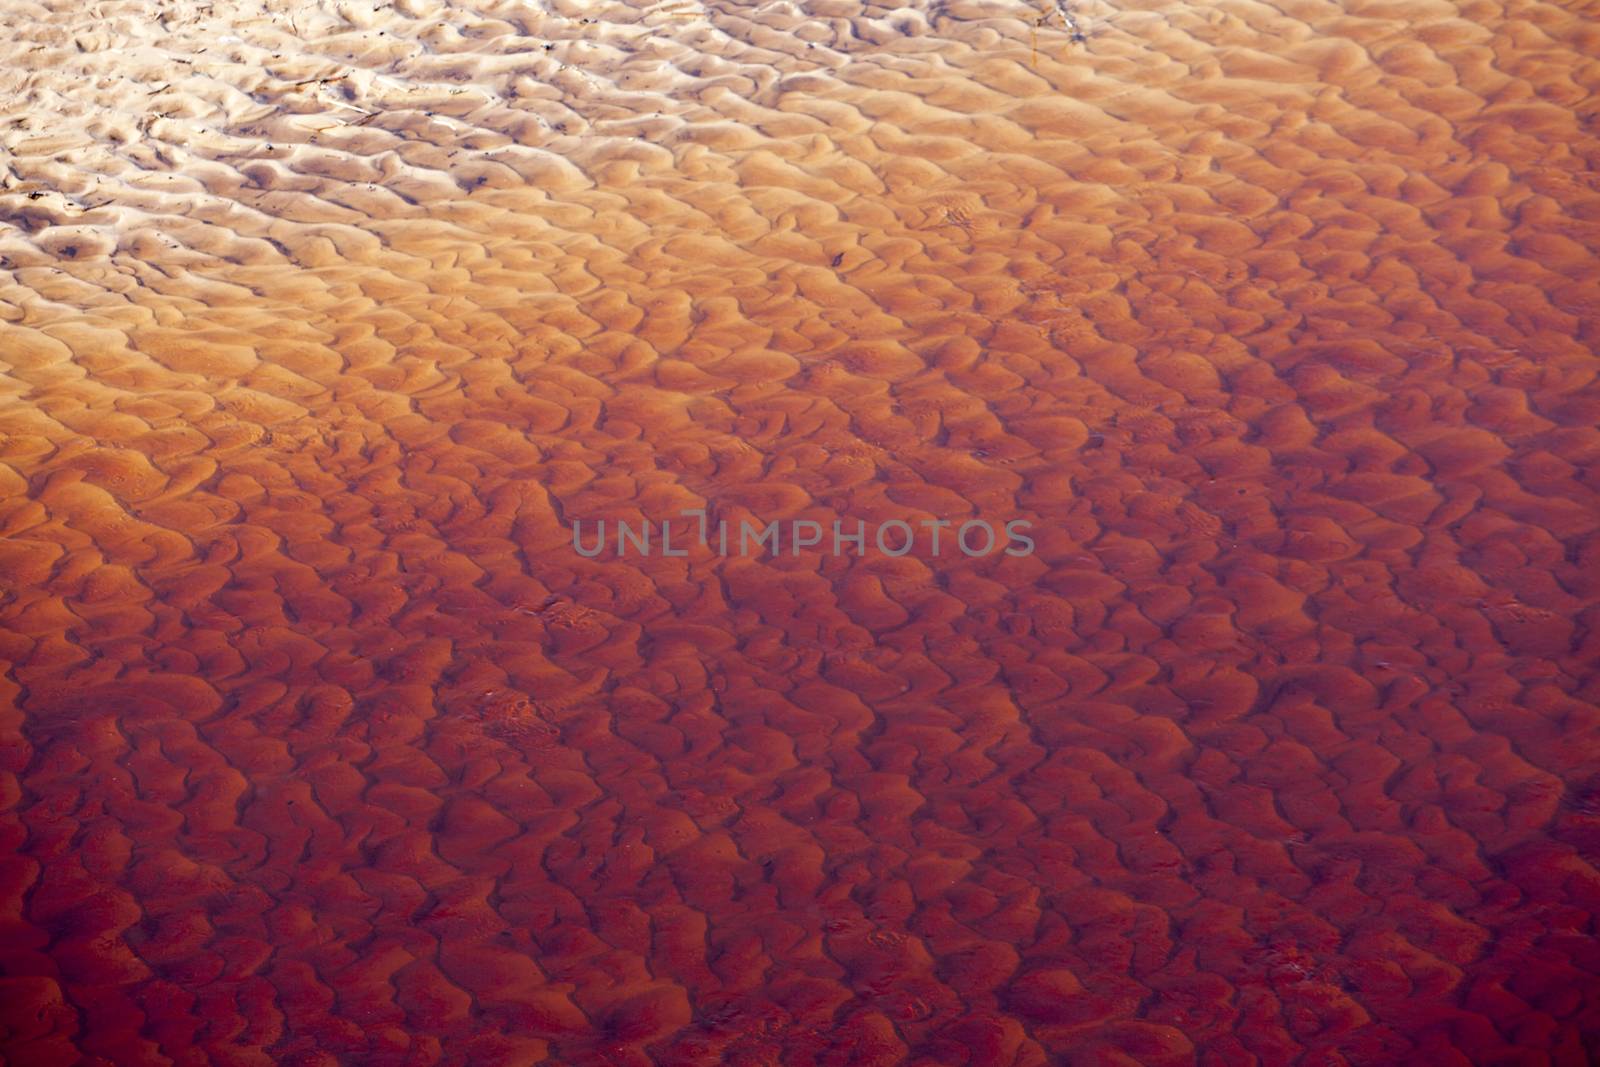 Wavy sand texture patterns on the bottom of the river in red